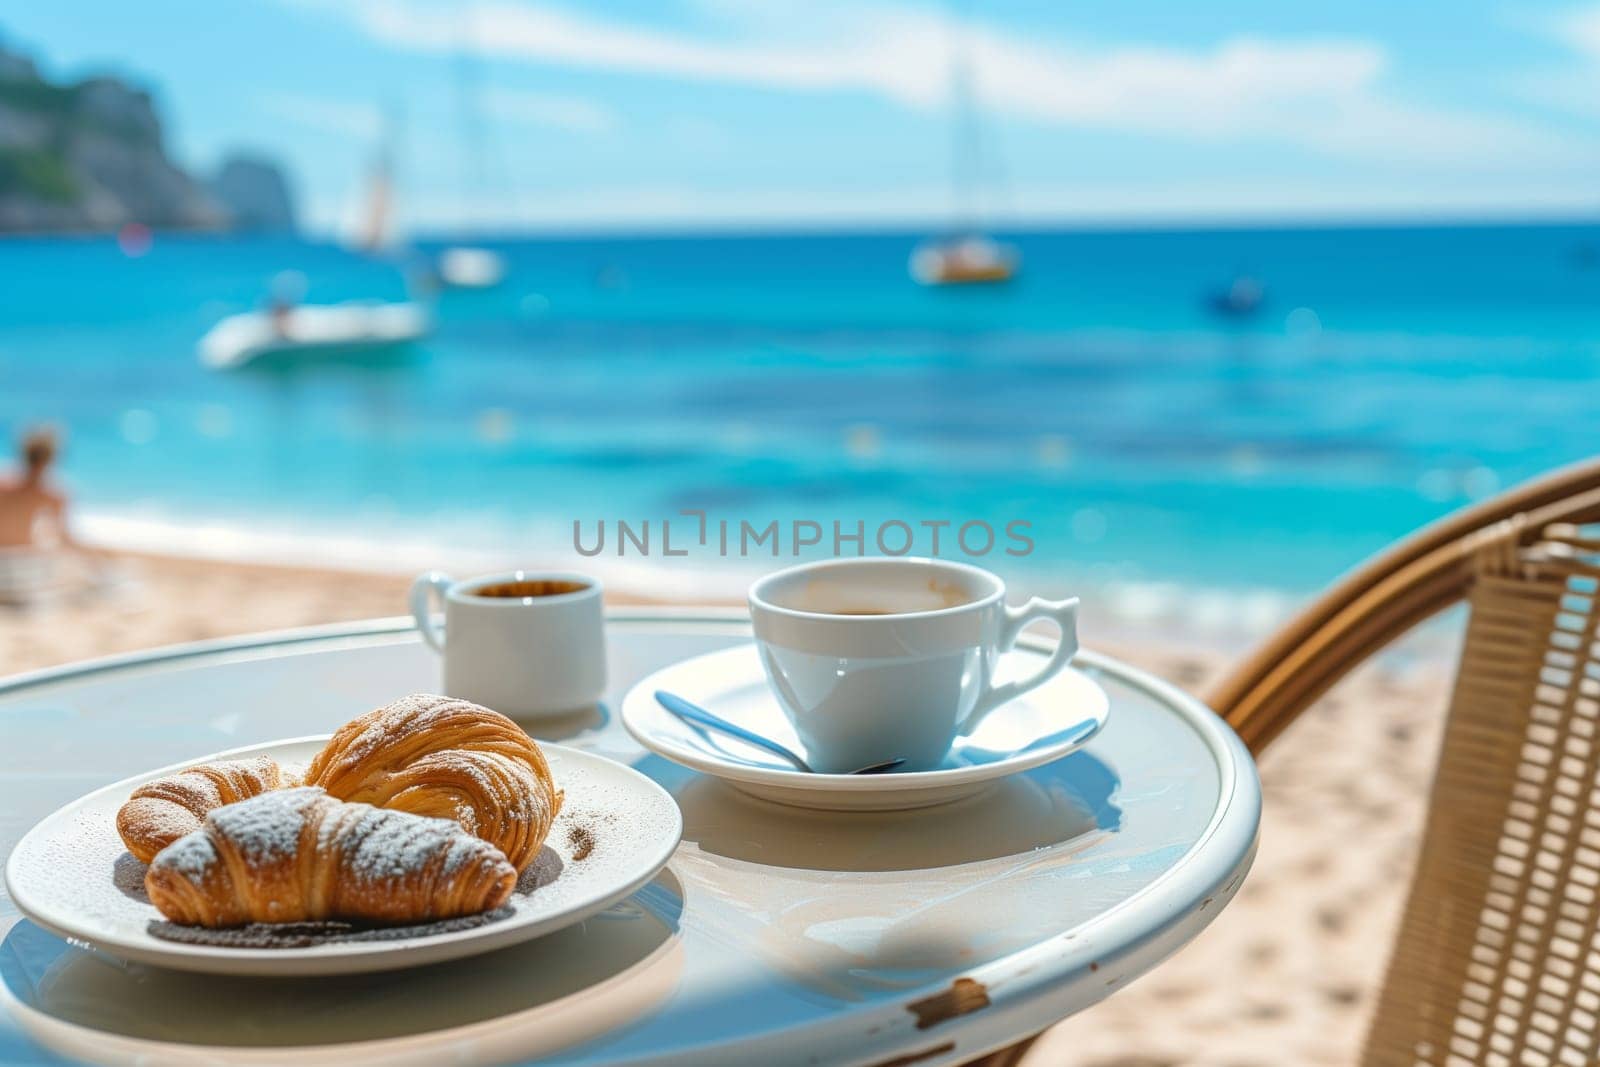 A plate of croissants and a cup of coffee sit on a table by the azure water, with fluffy clouds in the sky. The dishware glistens in the sun, as a boat sails by in the distance